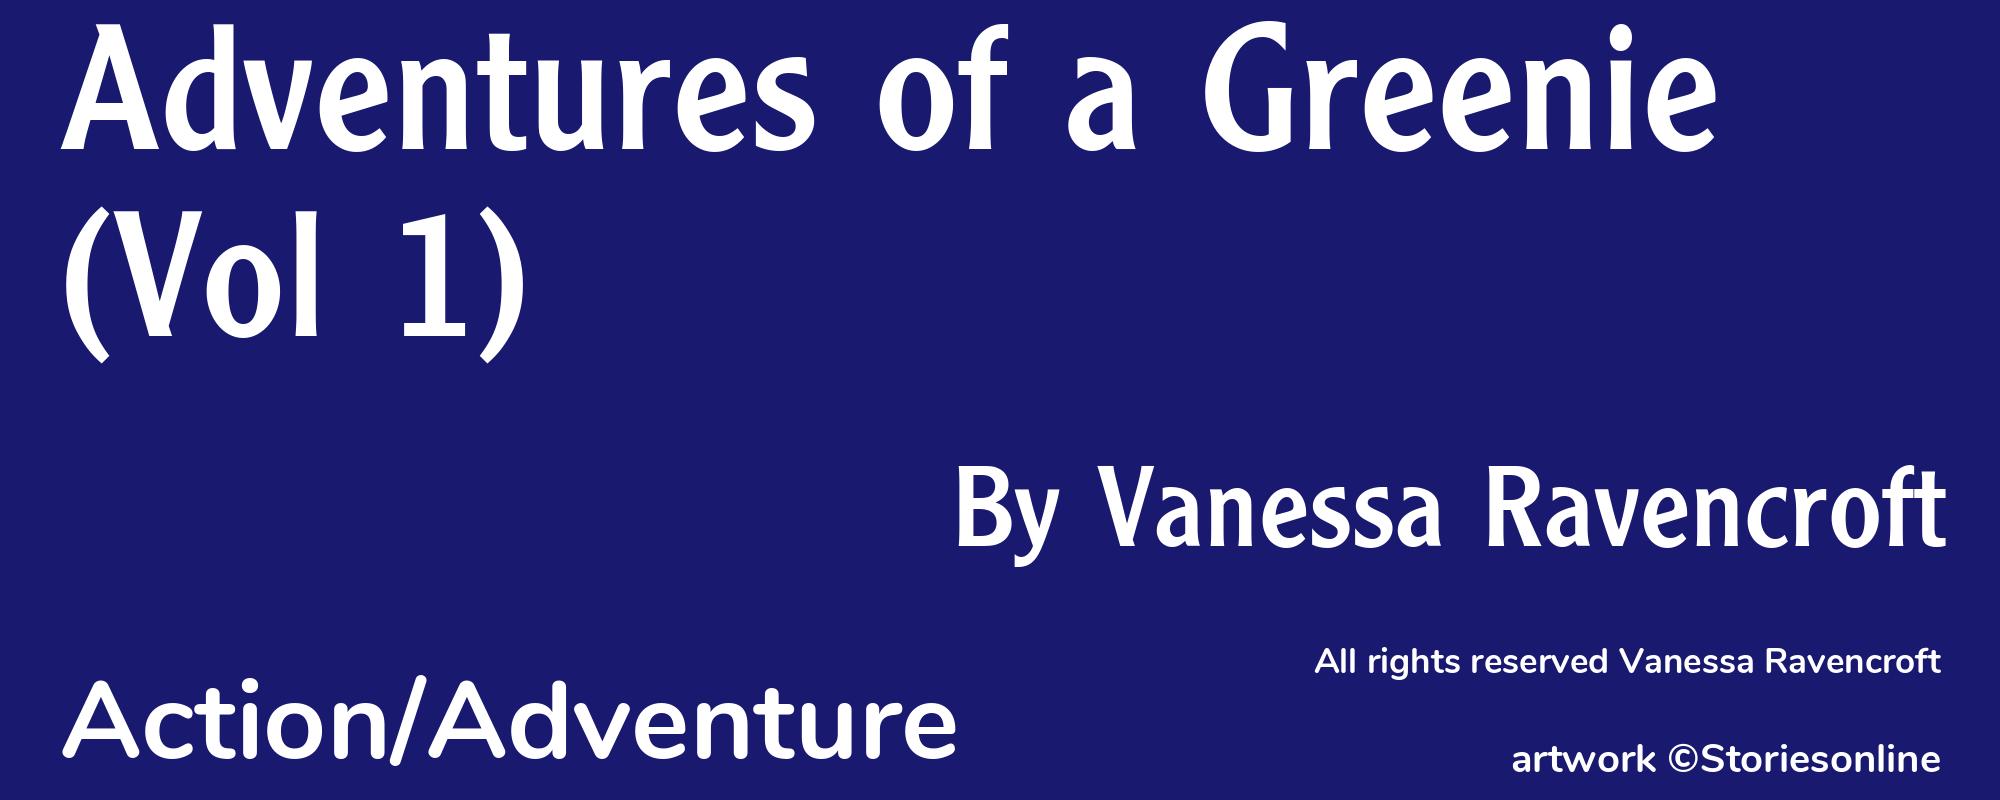 Adventures of a Greenie (Vol 1) - Cover